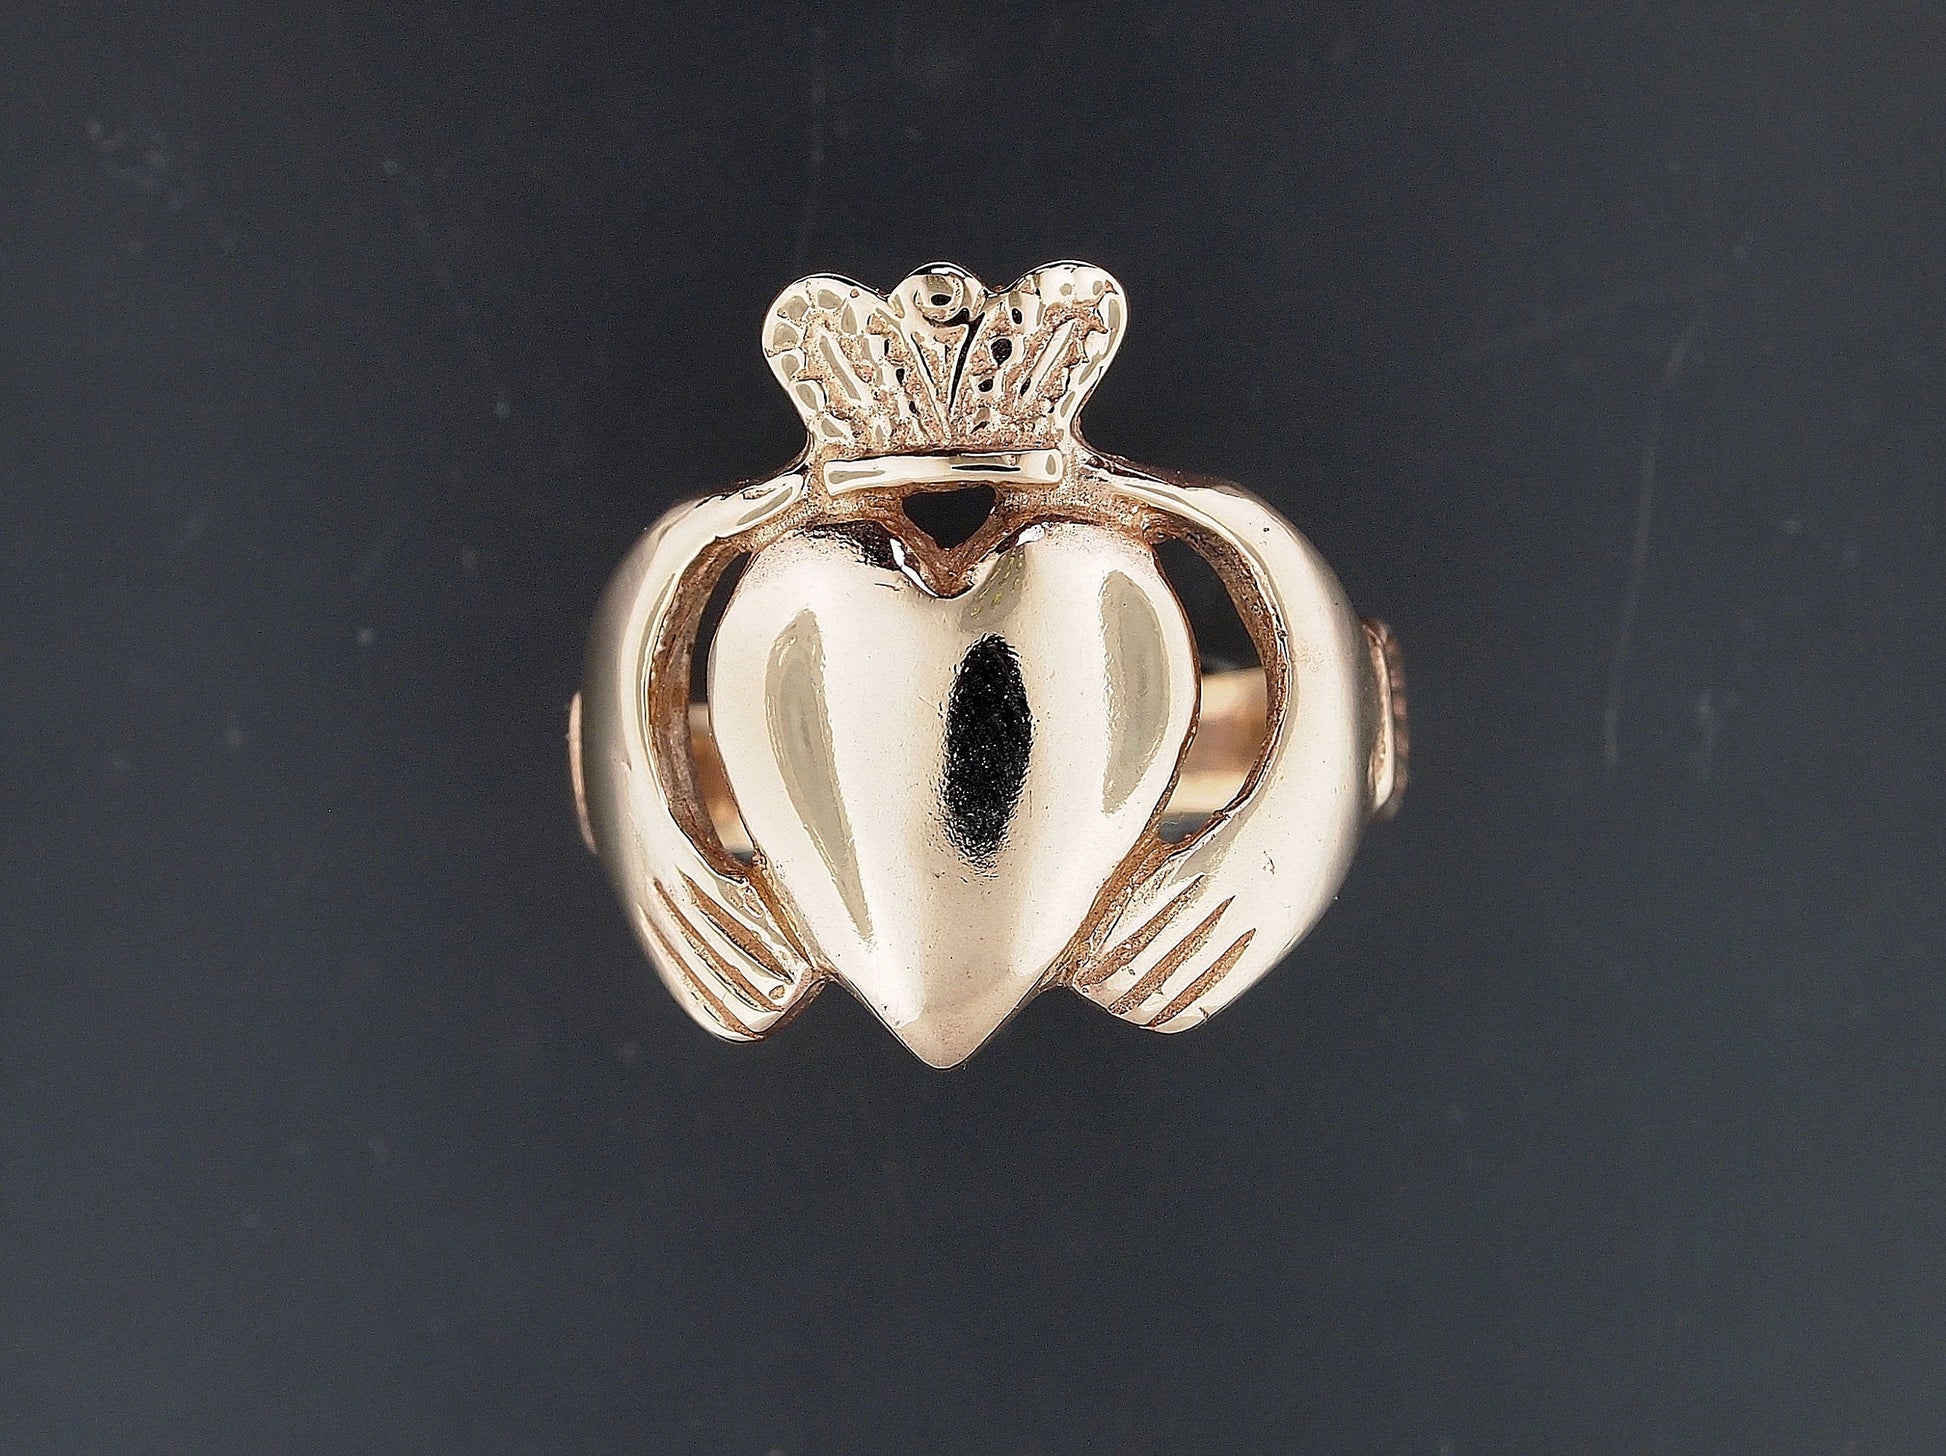 Mens Large Claddagh Ring in 925 Silver or Bronze, Irish Cletic Claddagh Ring Gift for Him, Irish Celtic Love Ring, Traditional Claddagh Ring, Hands Heart Crown, Irish Celtic Antique Bronze Ring, Claddagh In Antique Bronze, Claddagh Ring For Men